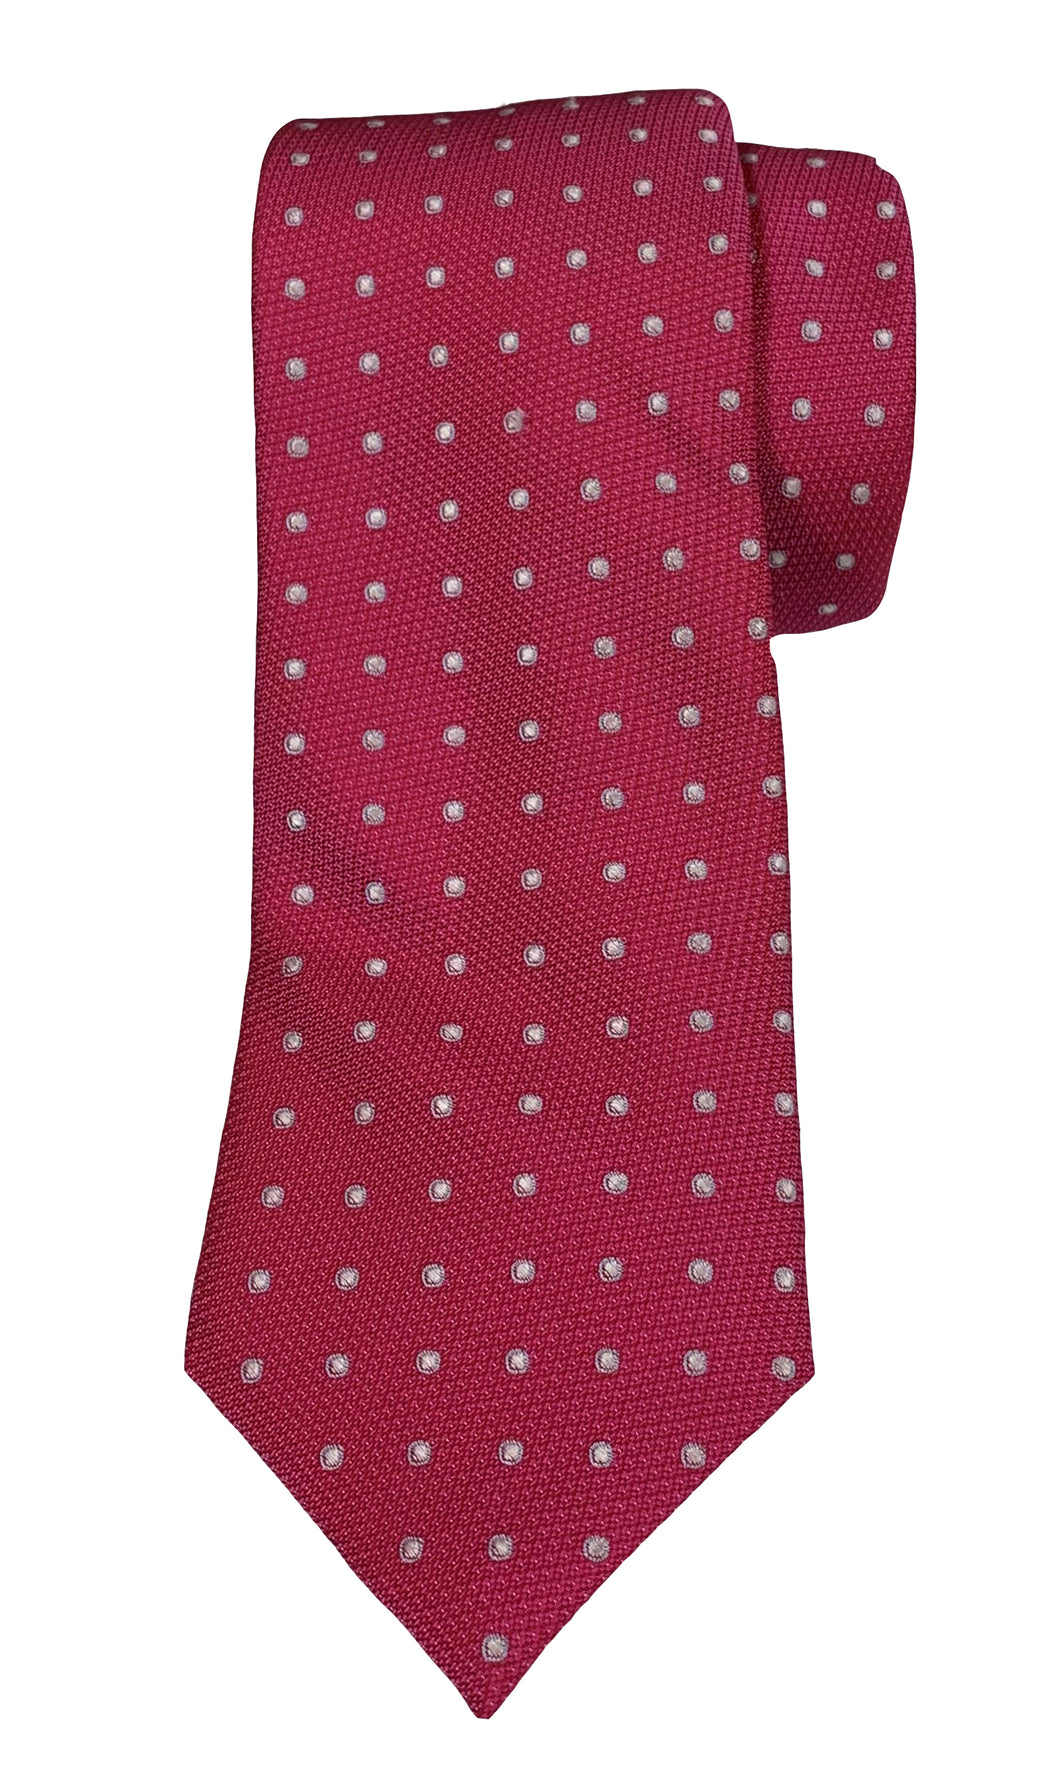 David Donahue Berry Tie with White/Grey Dots